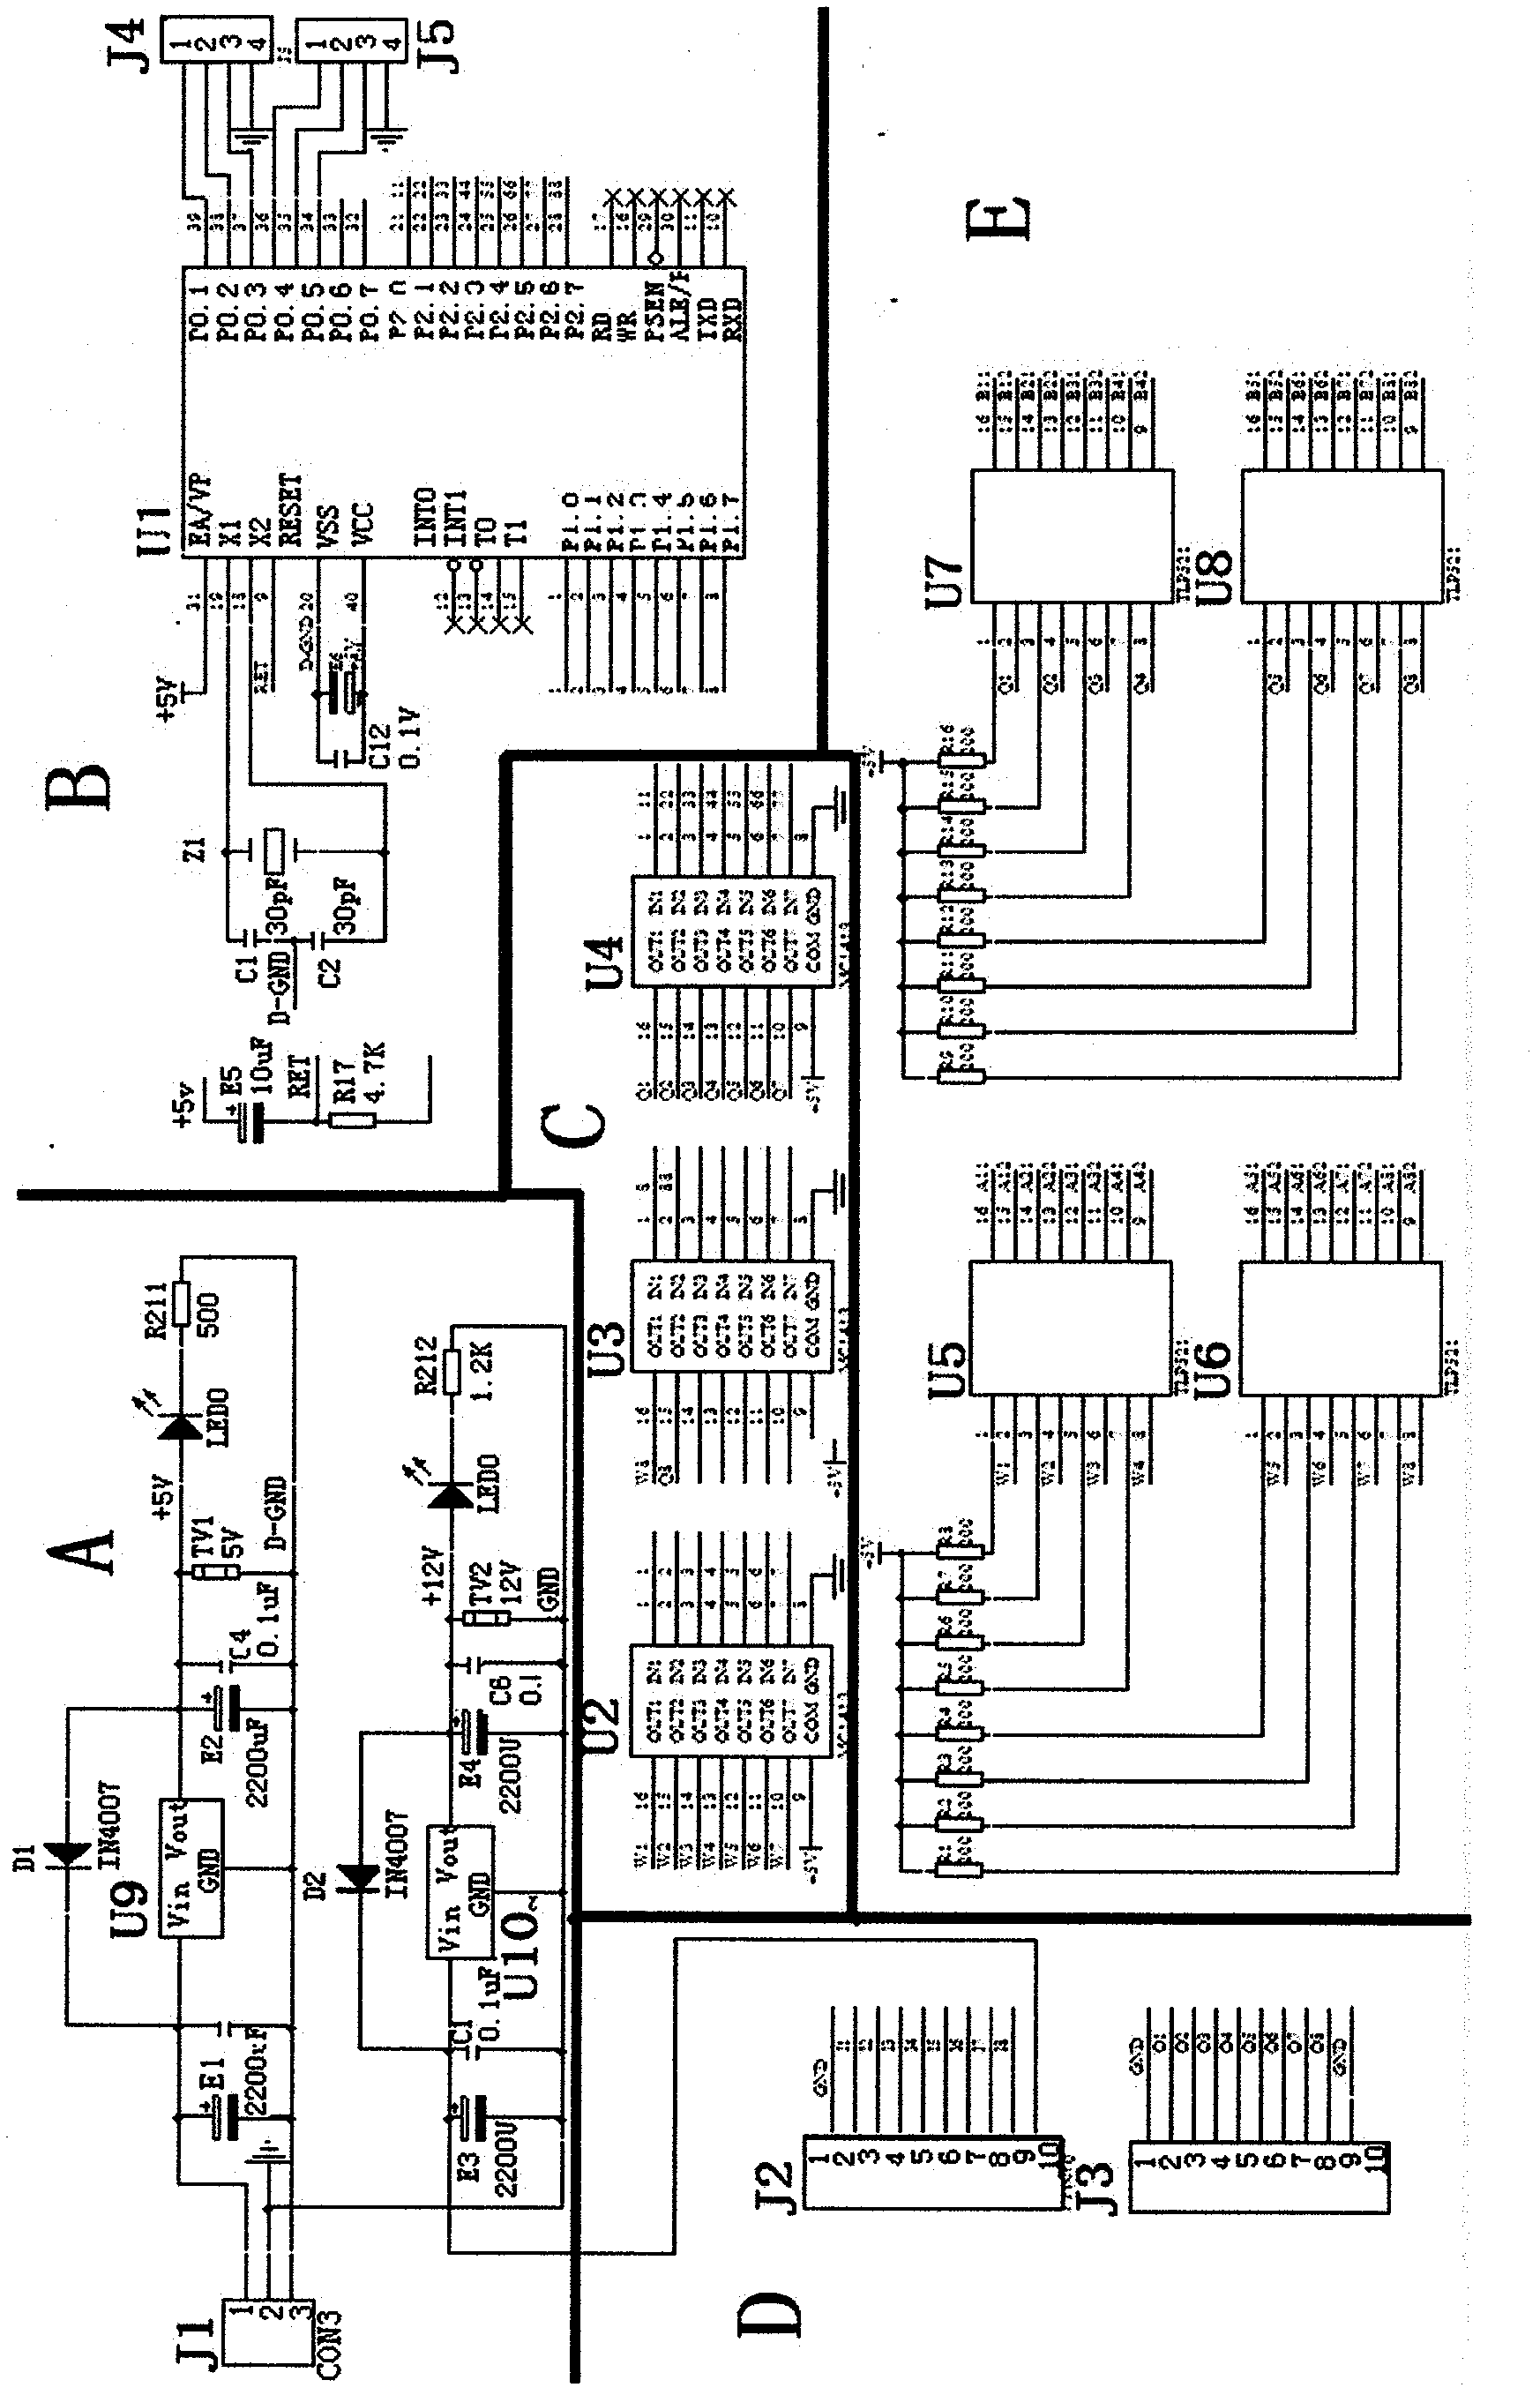 Steel structure performance measurement and control circuit system based on piezoelectric principal element rod piece